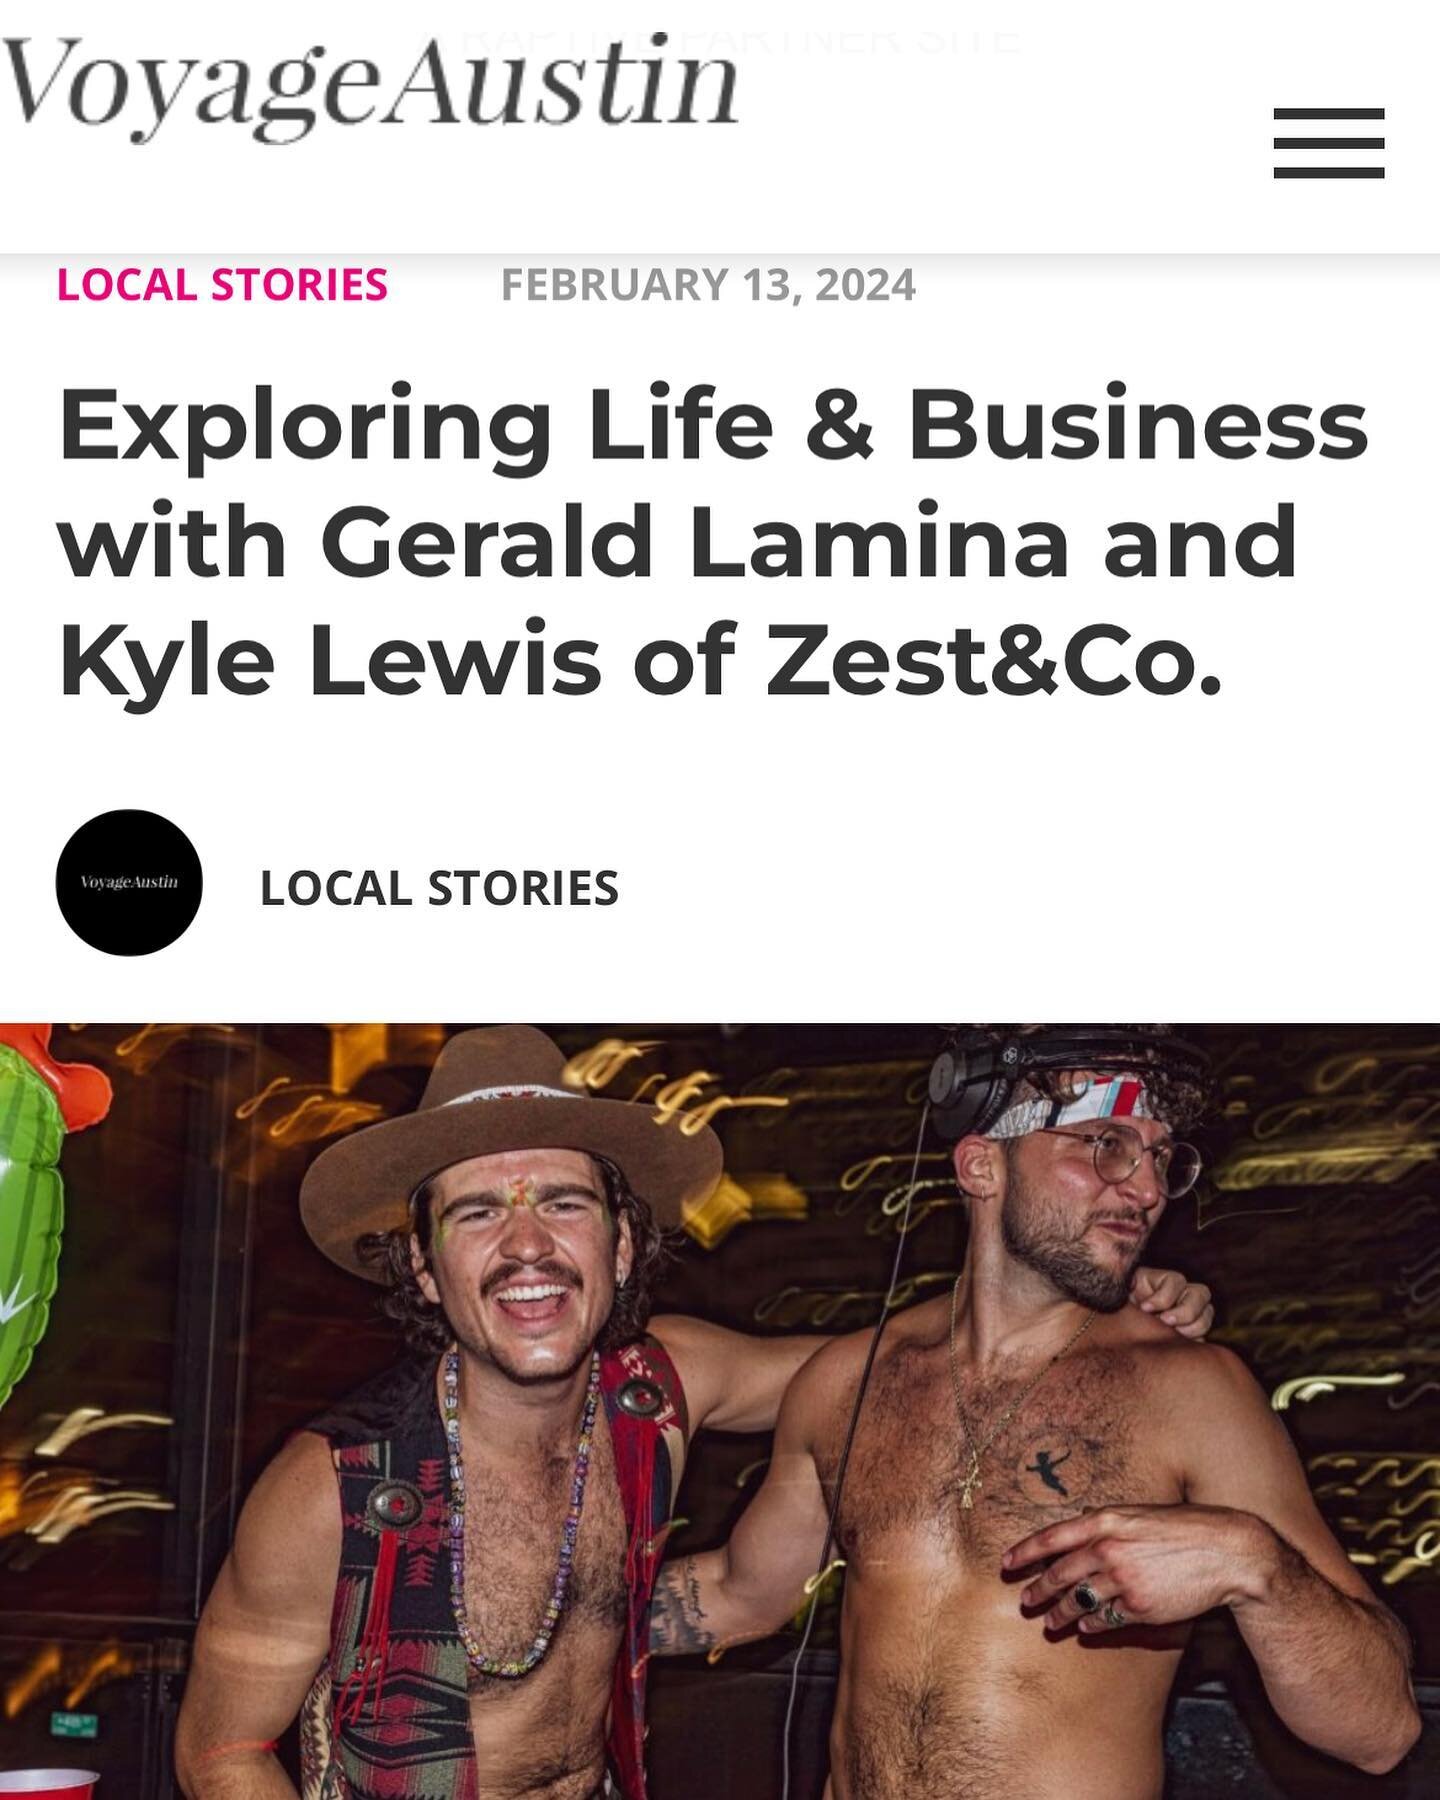 Super honored to be featured in @voyageaustin this week for successful local businesses.

A huge shoutout to everyone who has sponsored, added activations, and worked with us.

Biggest shoutout to the zesty community that makes every event possible e